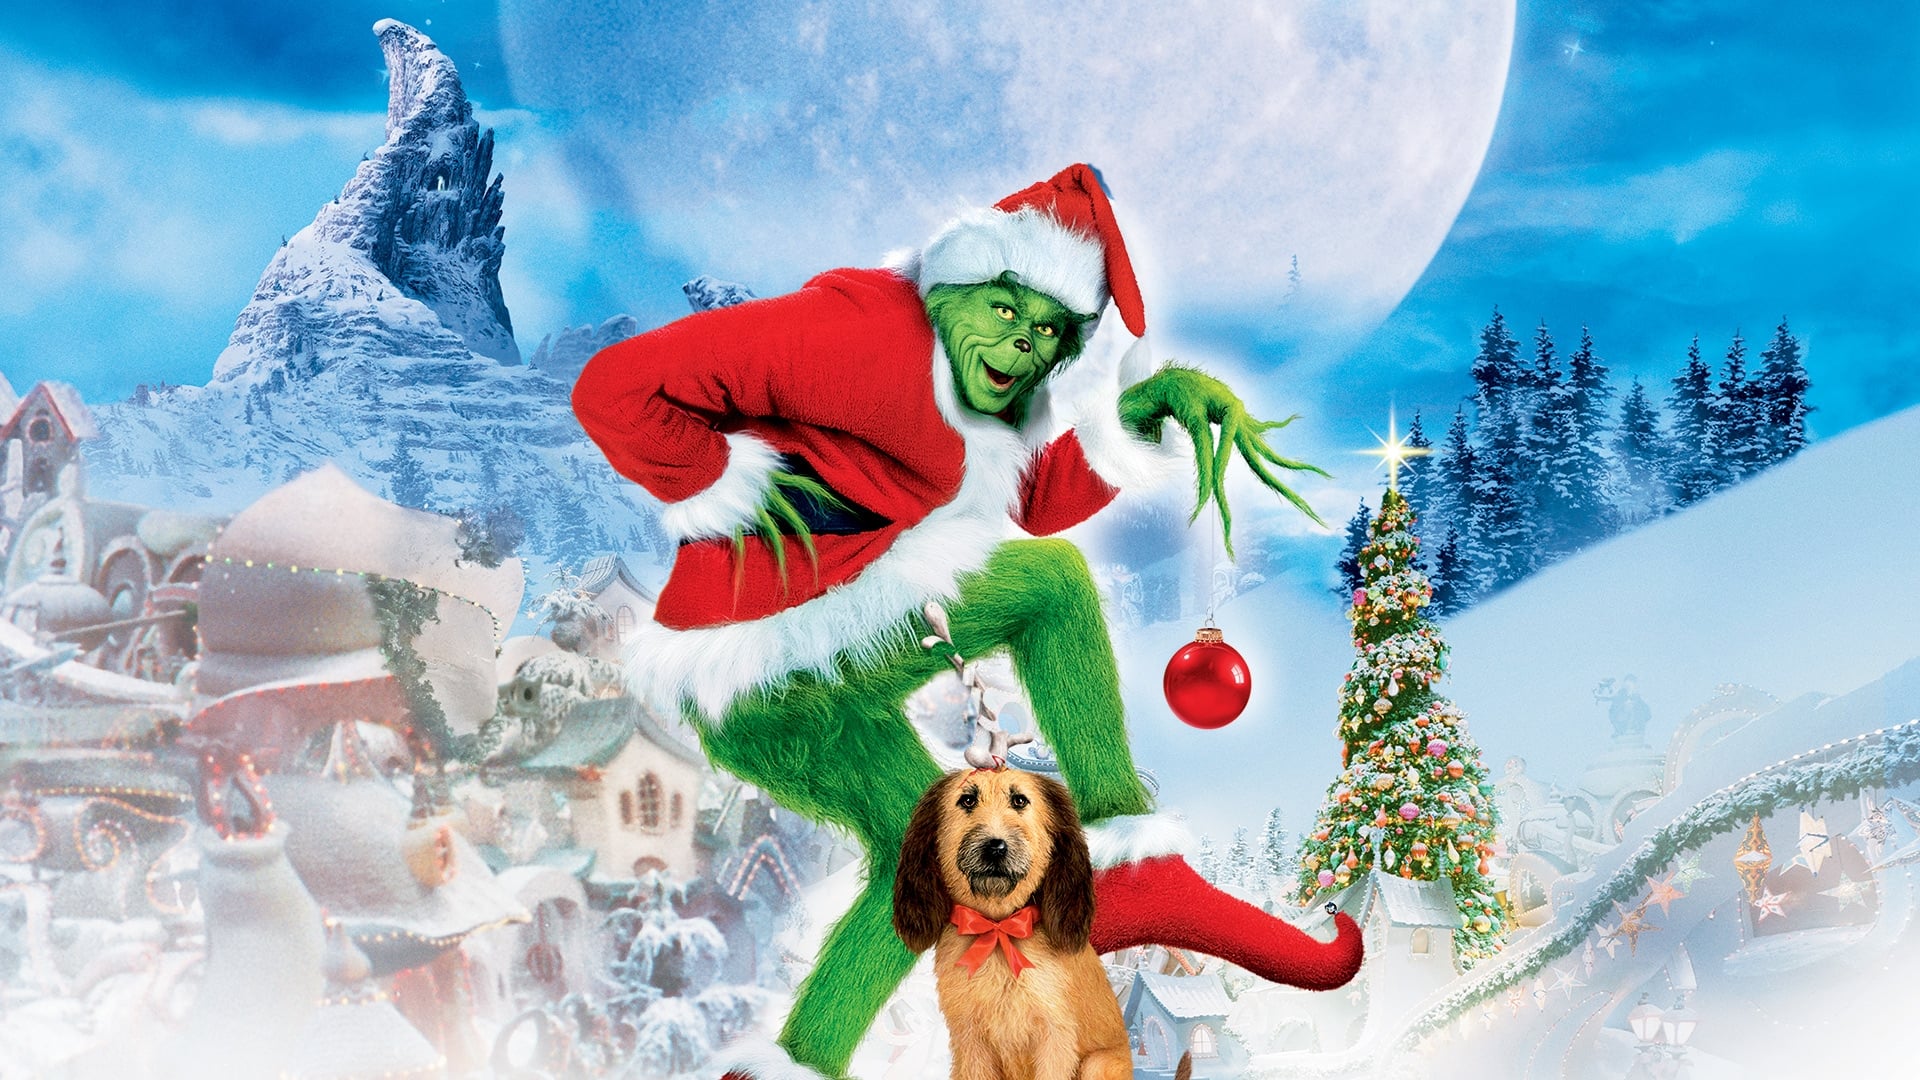 The Grinch (2000)